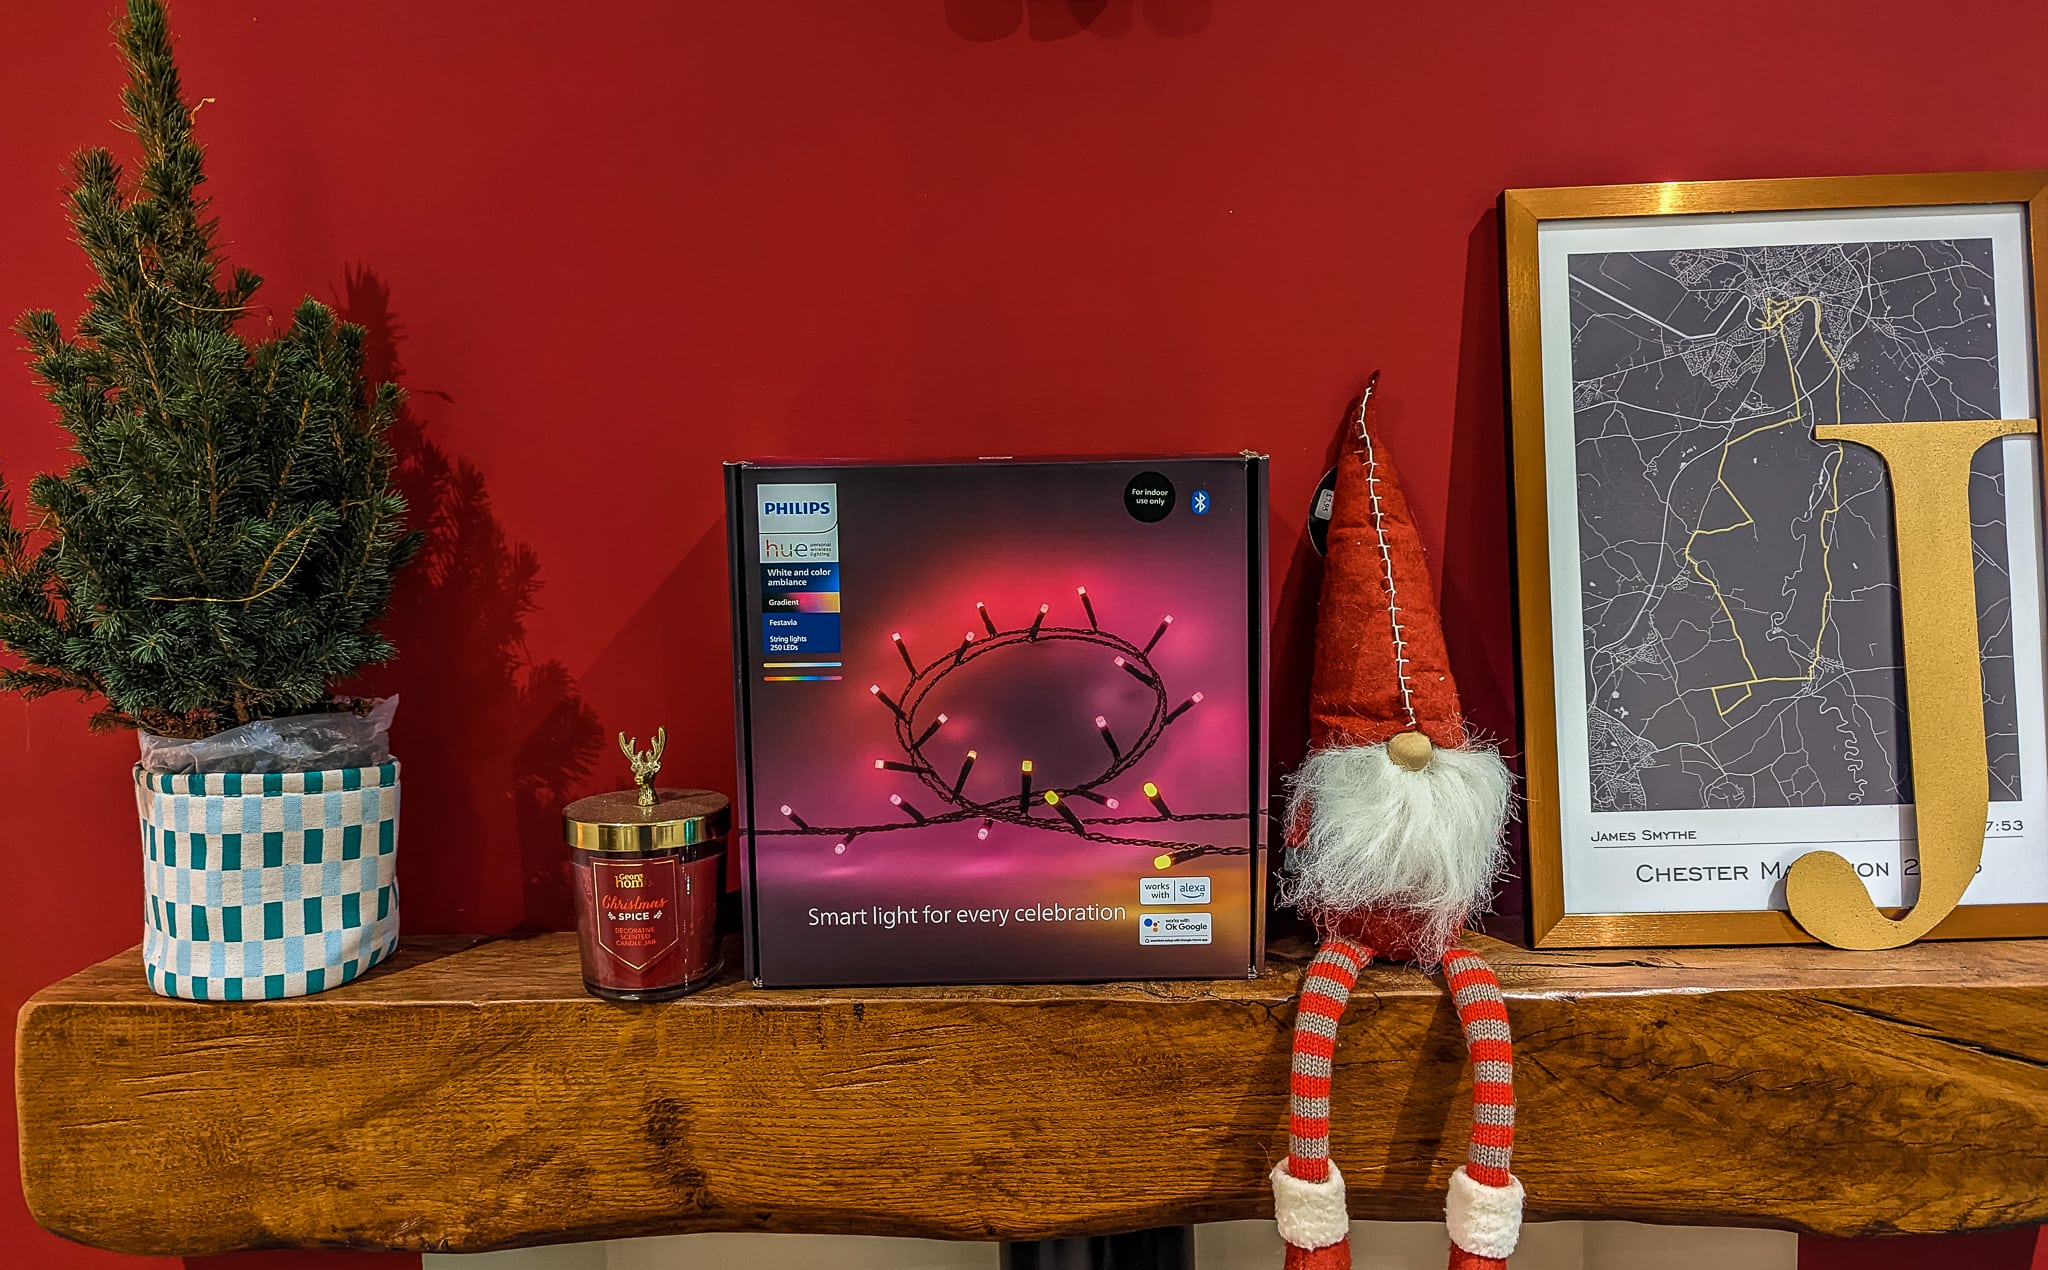 Philips Hue Festavia String Lights Review – Smart Christmas
tree lights that compete vs Twinkly